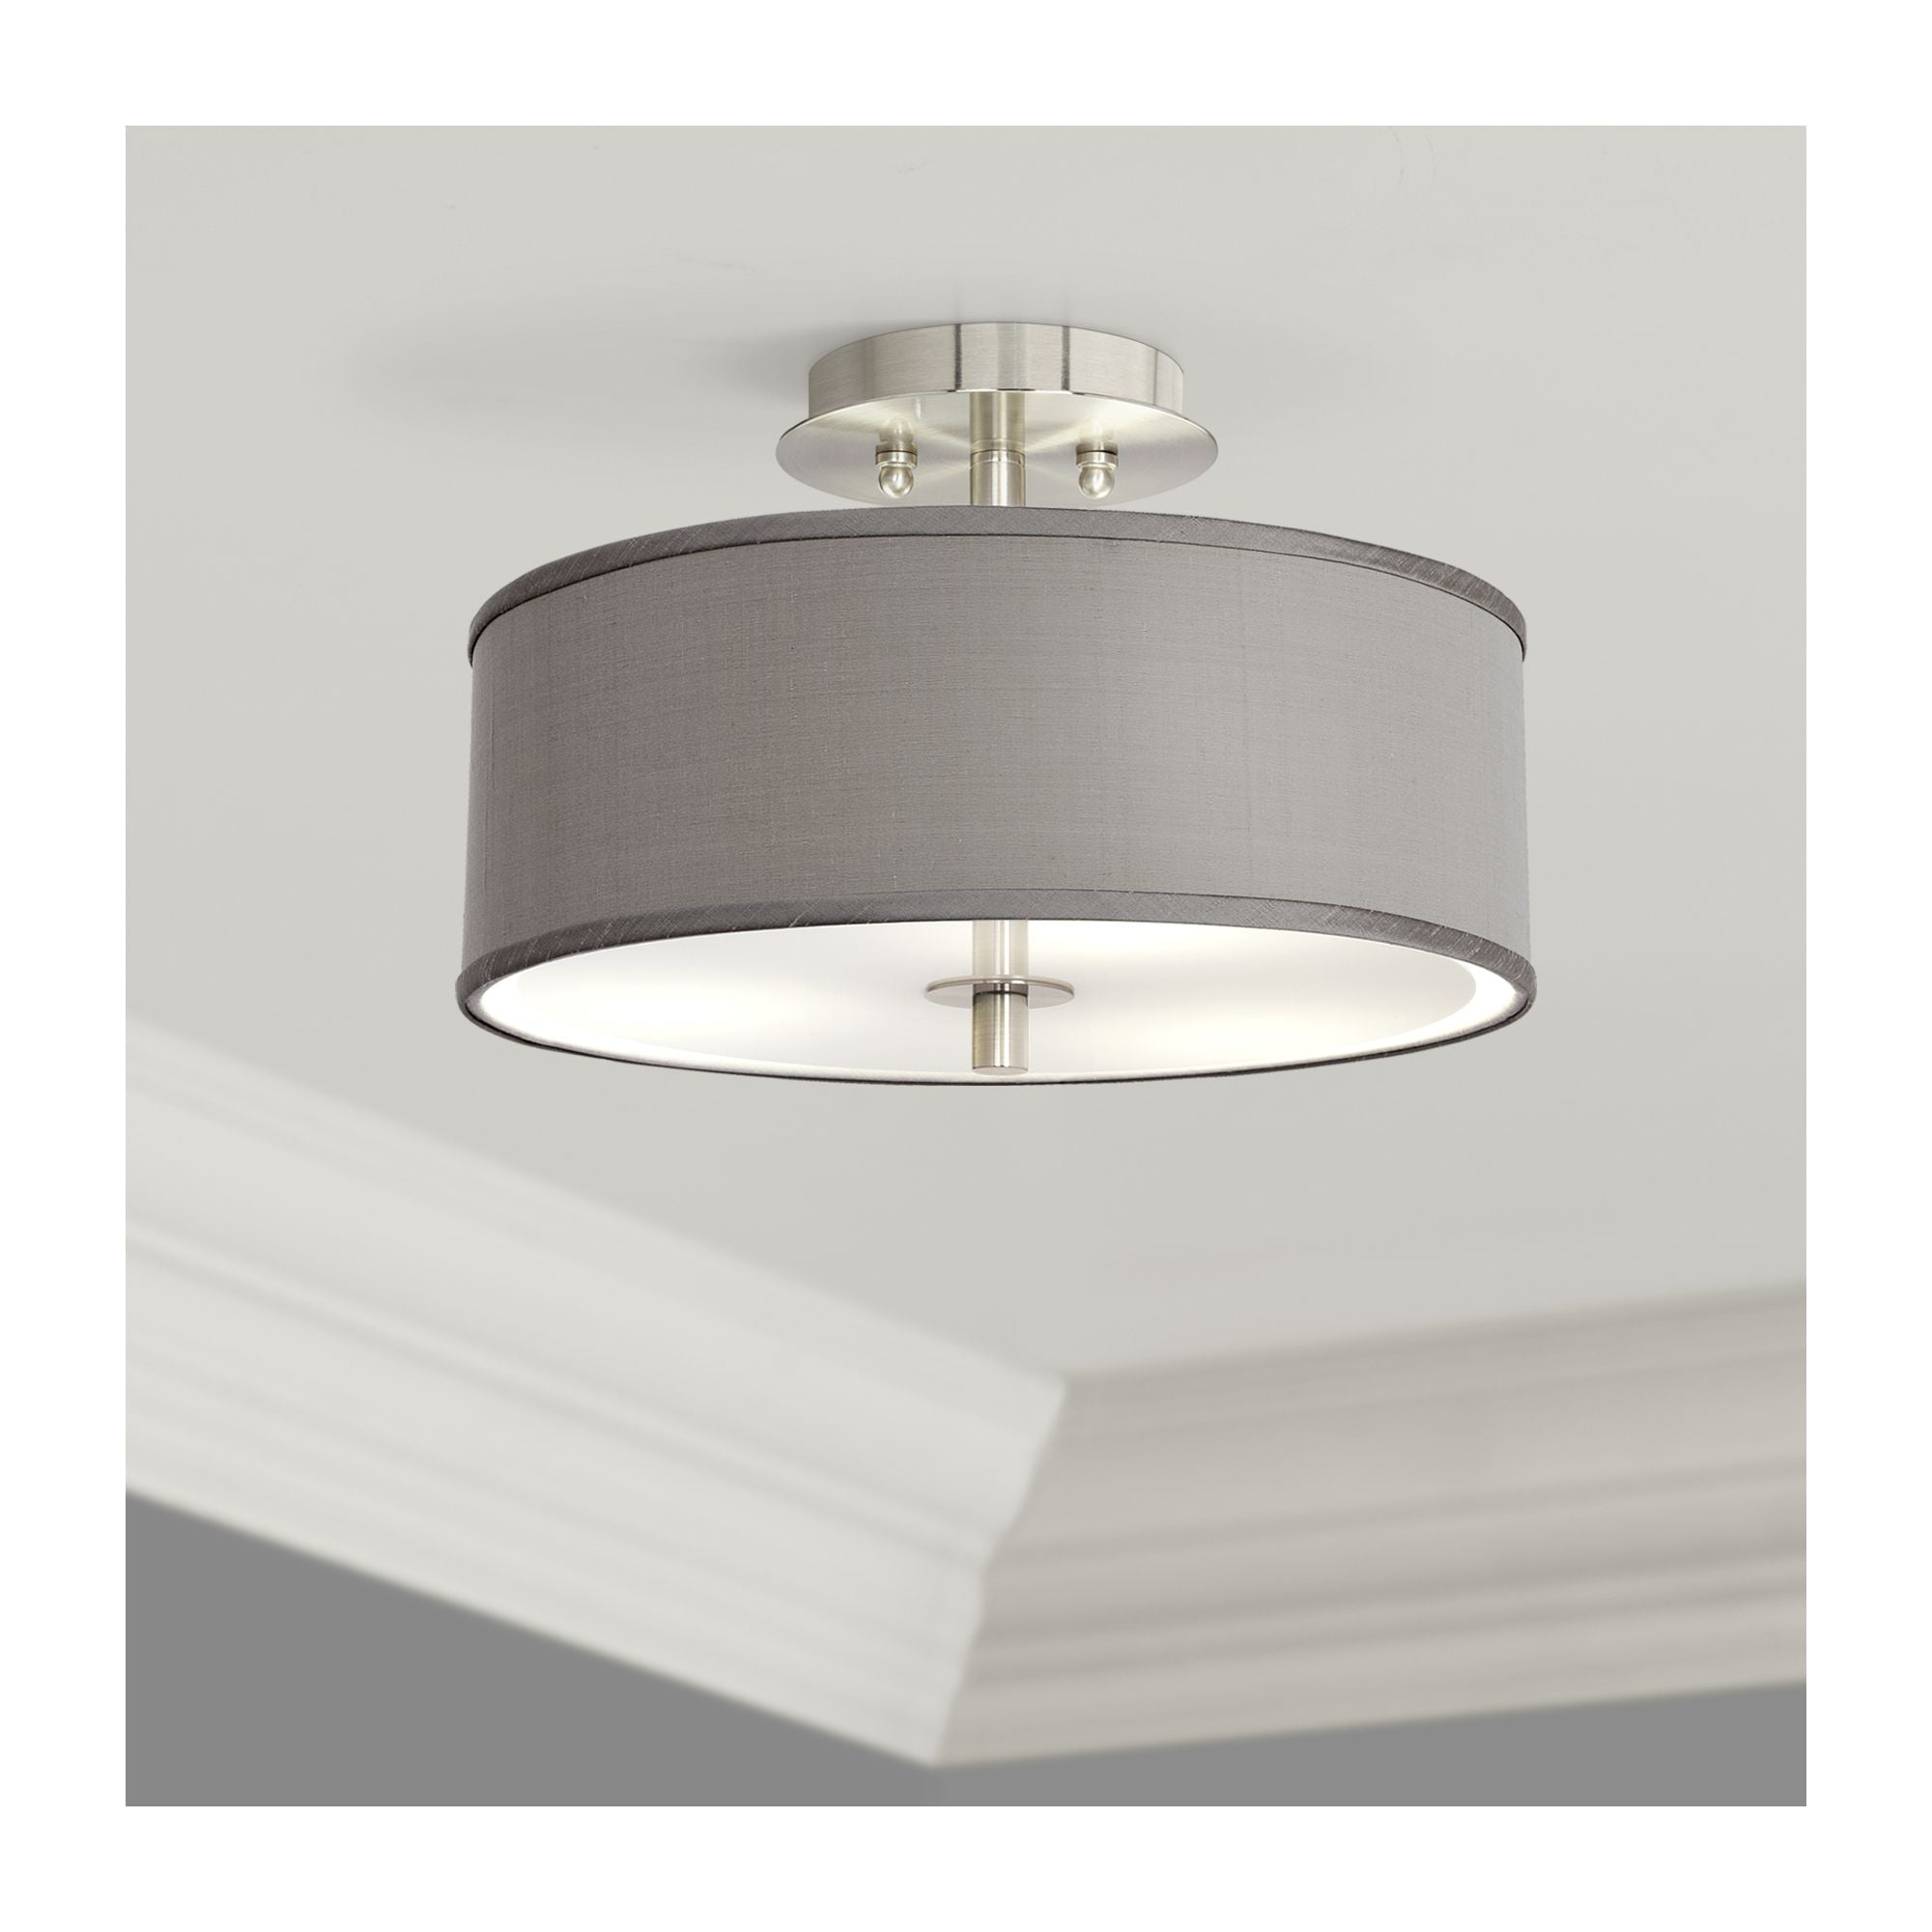 Light Grey Textured Woven Fabric Drum Lampshade with Brushed Silver Ceiling